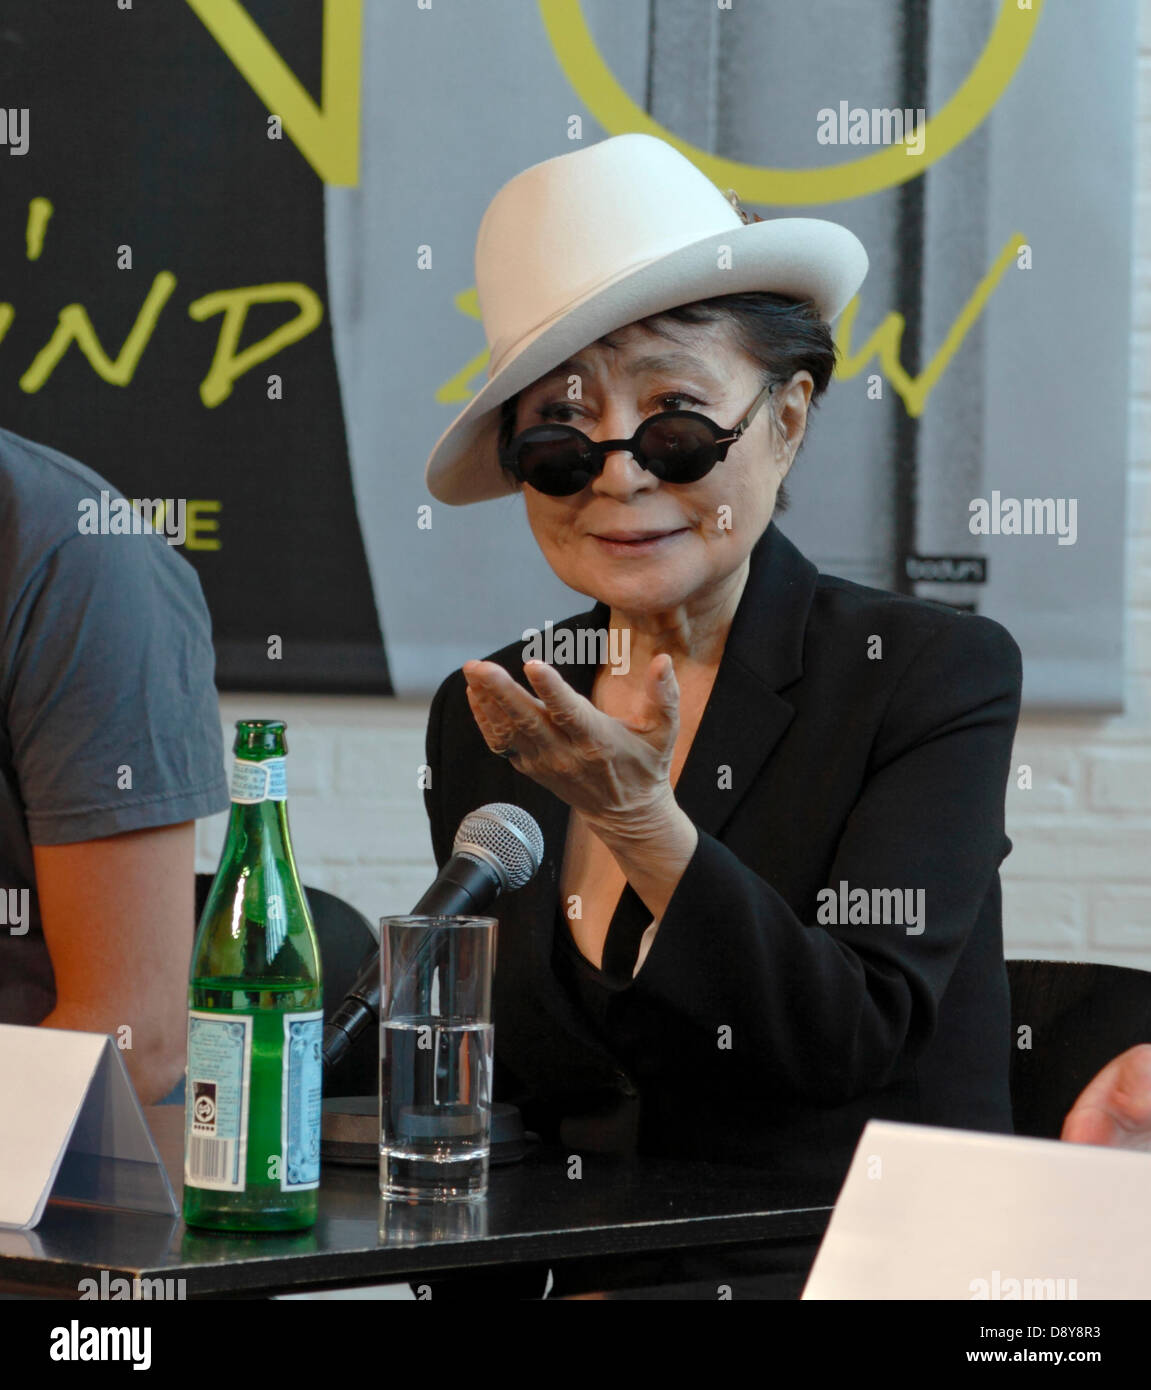 Humlebæk, Denmark. 6th June, 2013. Yoko Ono answering questions about her exhibition and how she keeps going strong at the press conference at Louisiana, the Museum of Modern Art between Copenhagen and Elsinore, opening her Half-A-Wind Show, a retrospective, showing from tomorrow and until September 29th. The exhibition is the so far largest in Europe by the 80-year-old artist. Credit:  Niels Quist/Alamy Live News Stock Photo